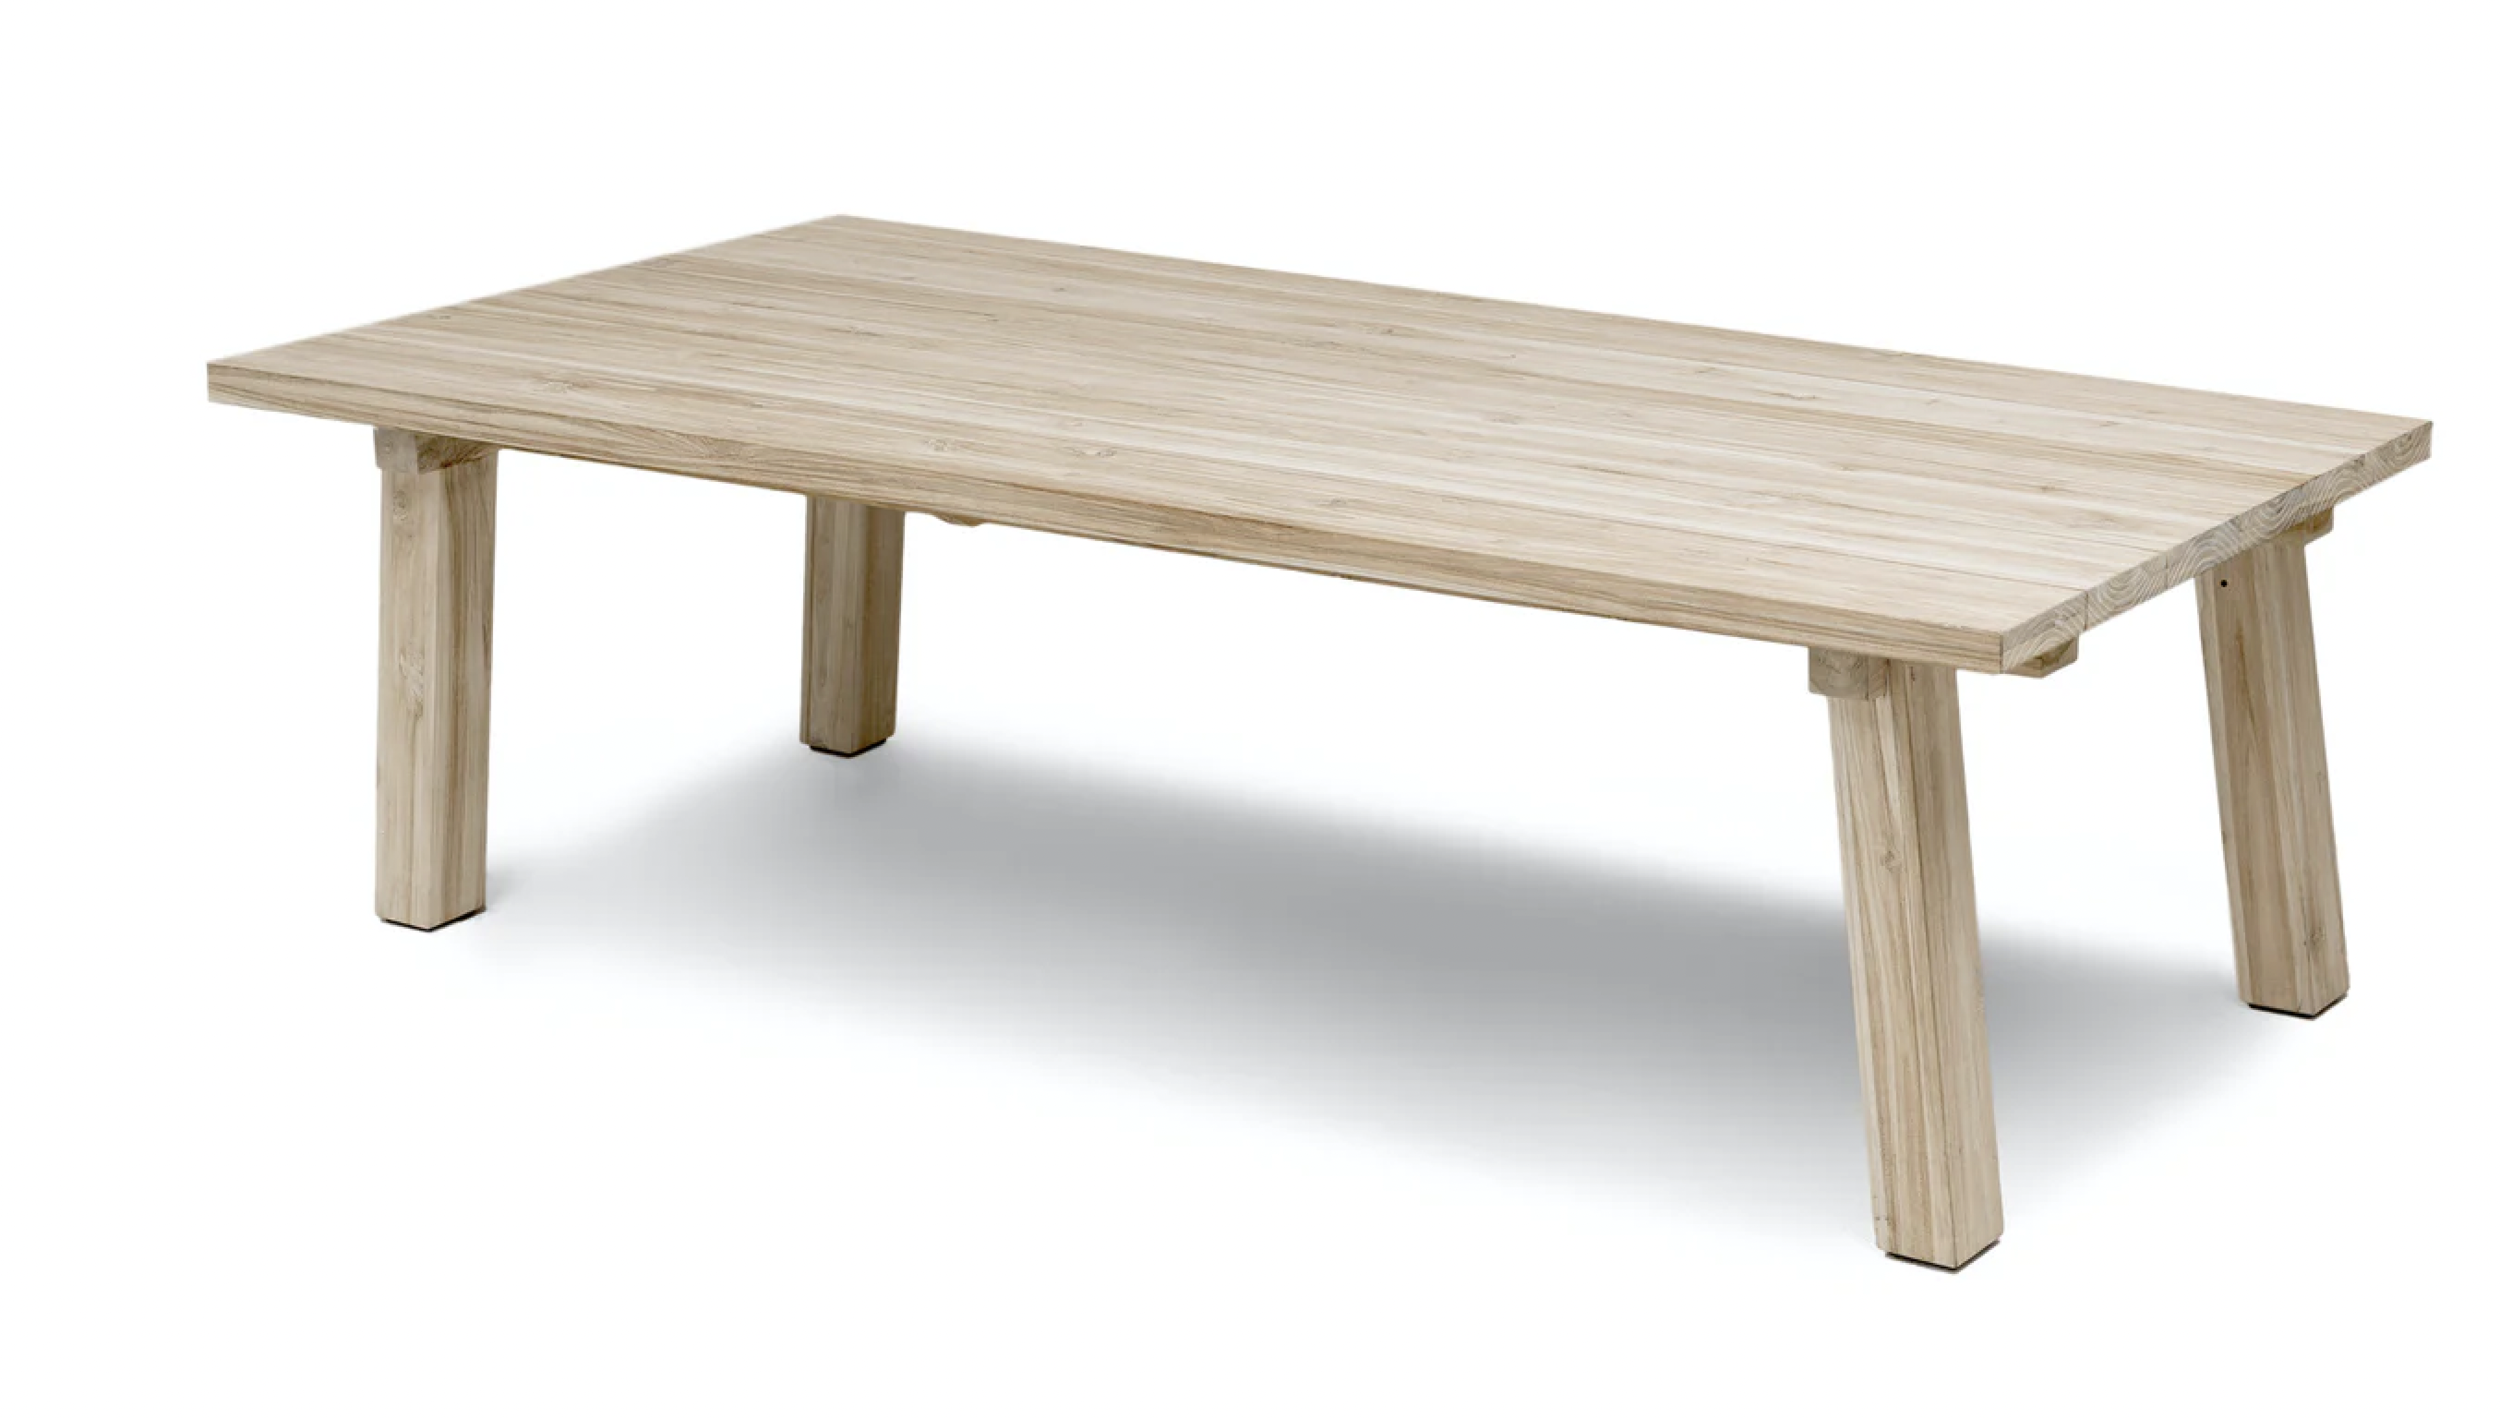 Article Teaka Dining Table